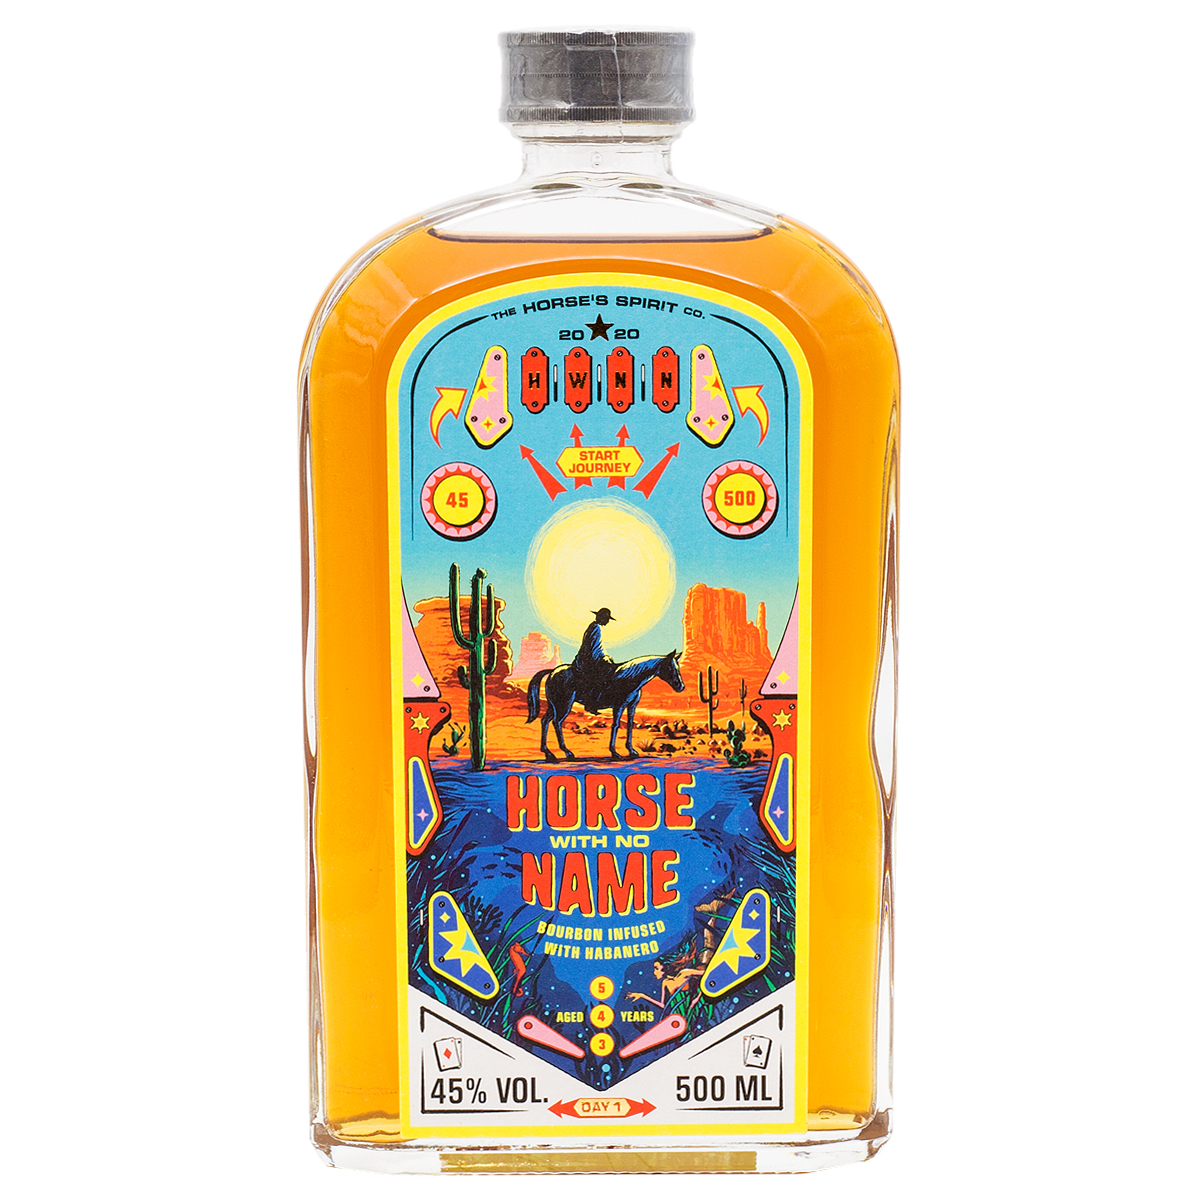 Bourbon Whiskey trifft auf Habanerso: Horse with no name 4 Years